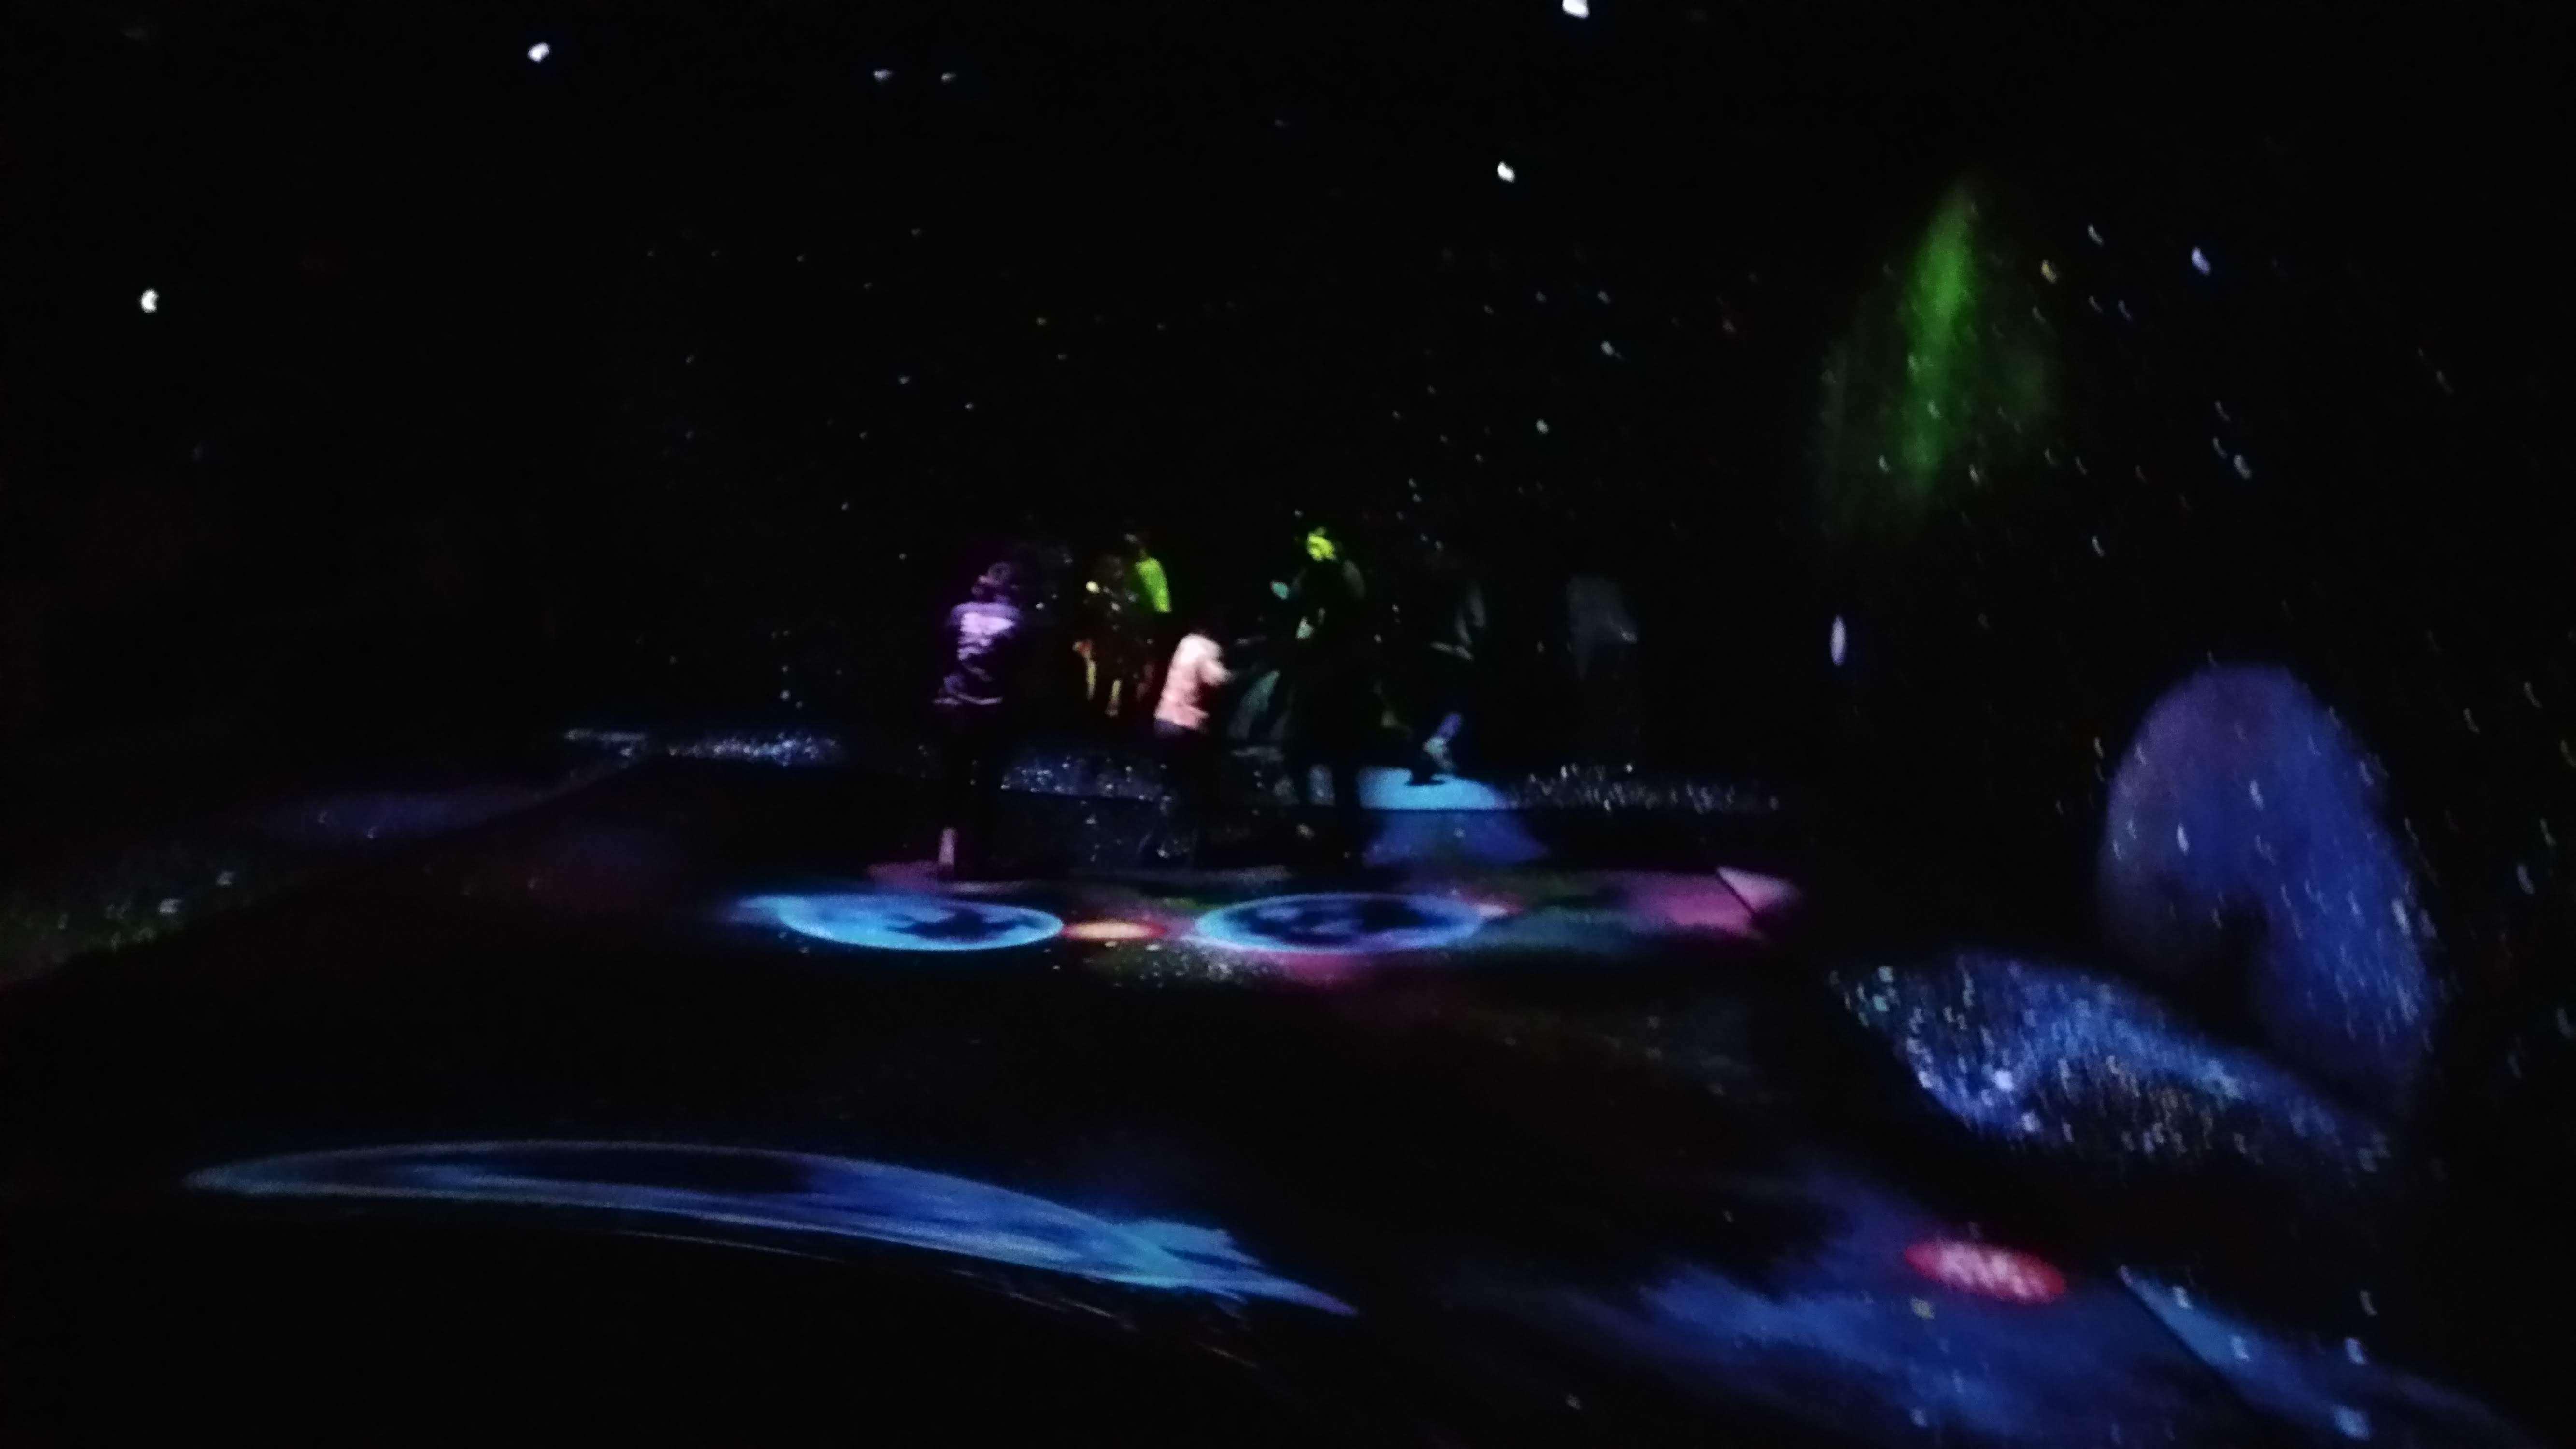 kids jump on a trampoline floor with planets projected on it